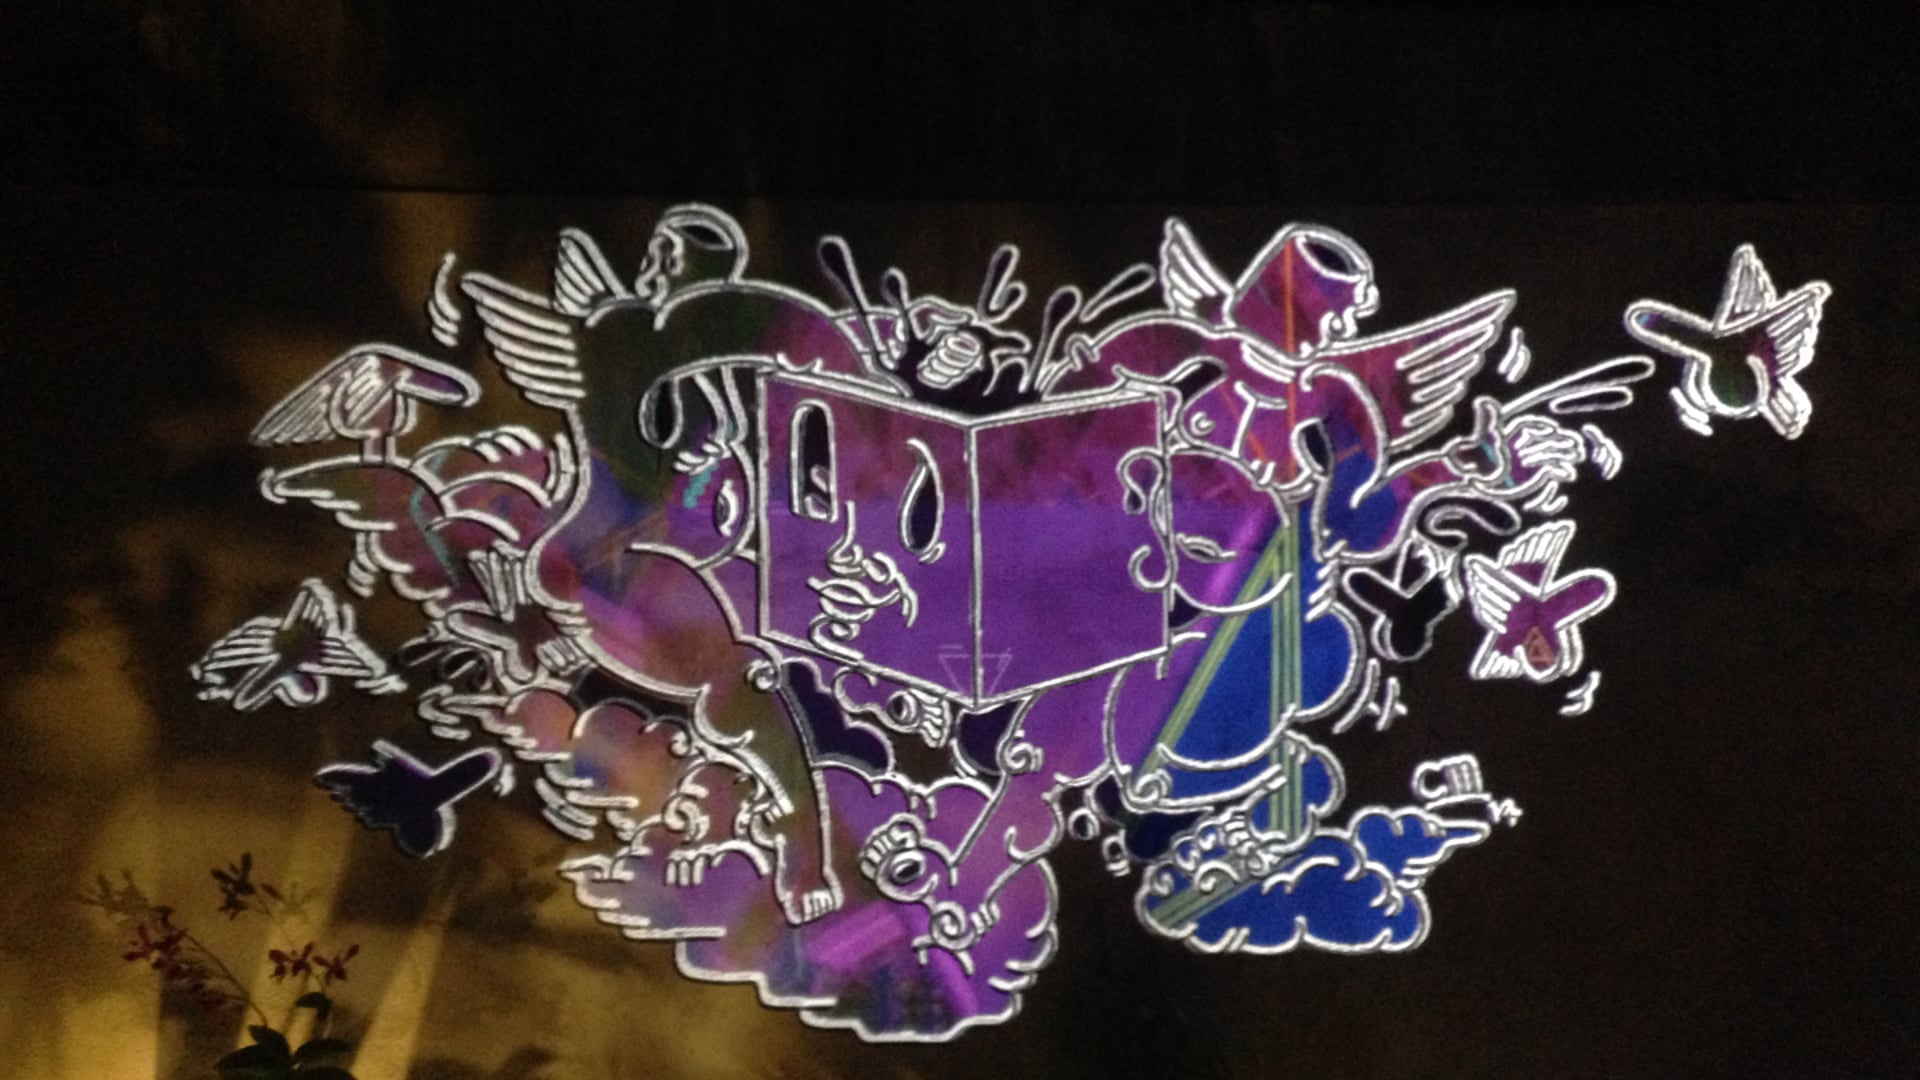 Mural Projection Mapping